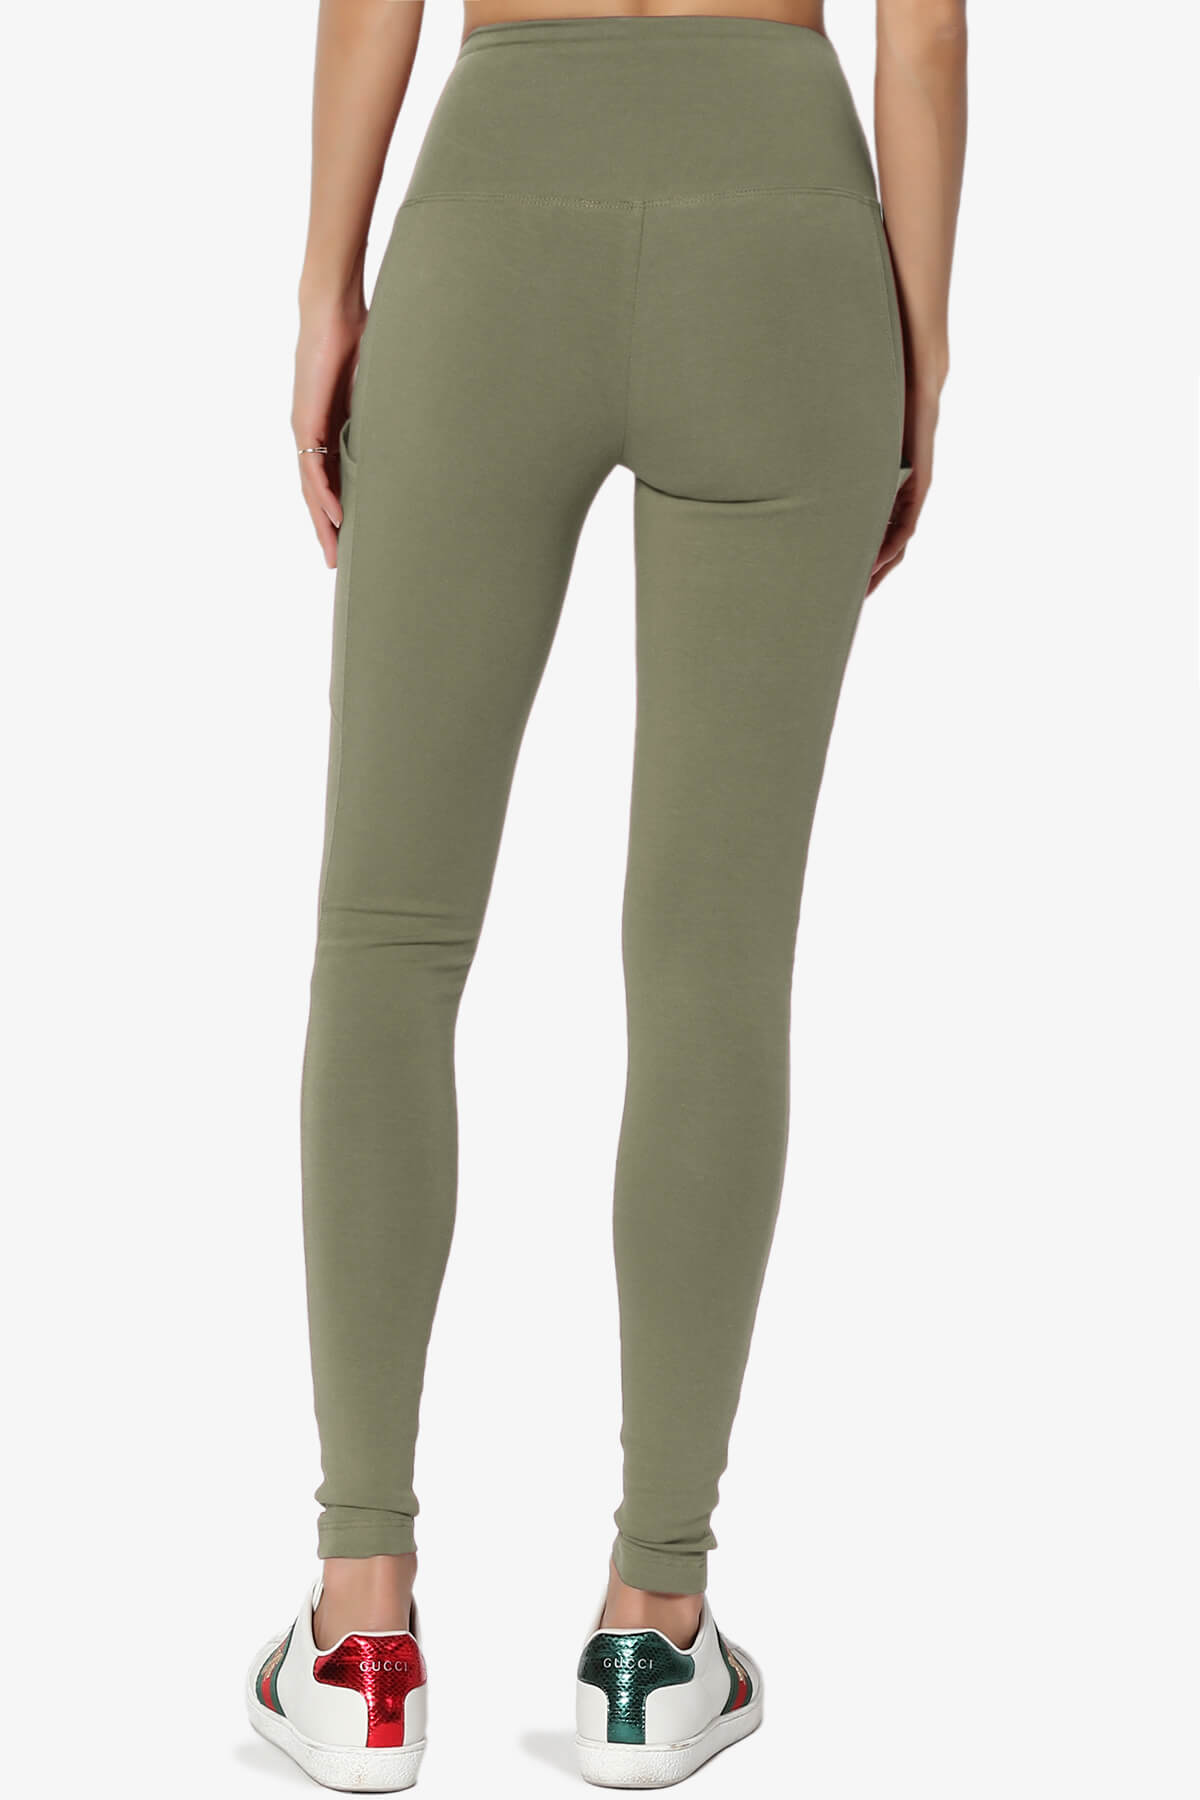 Ansley Luxe Cotton Leggings with Pockets DUSTY OLIVE_2